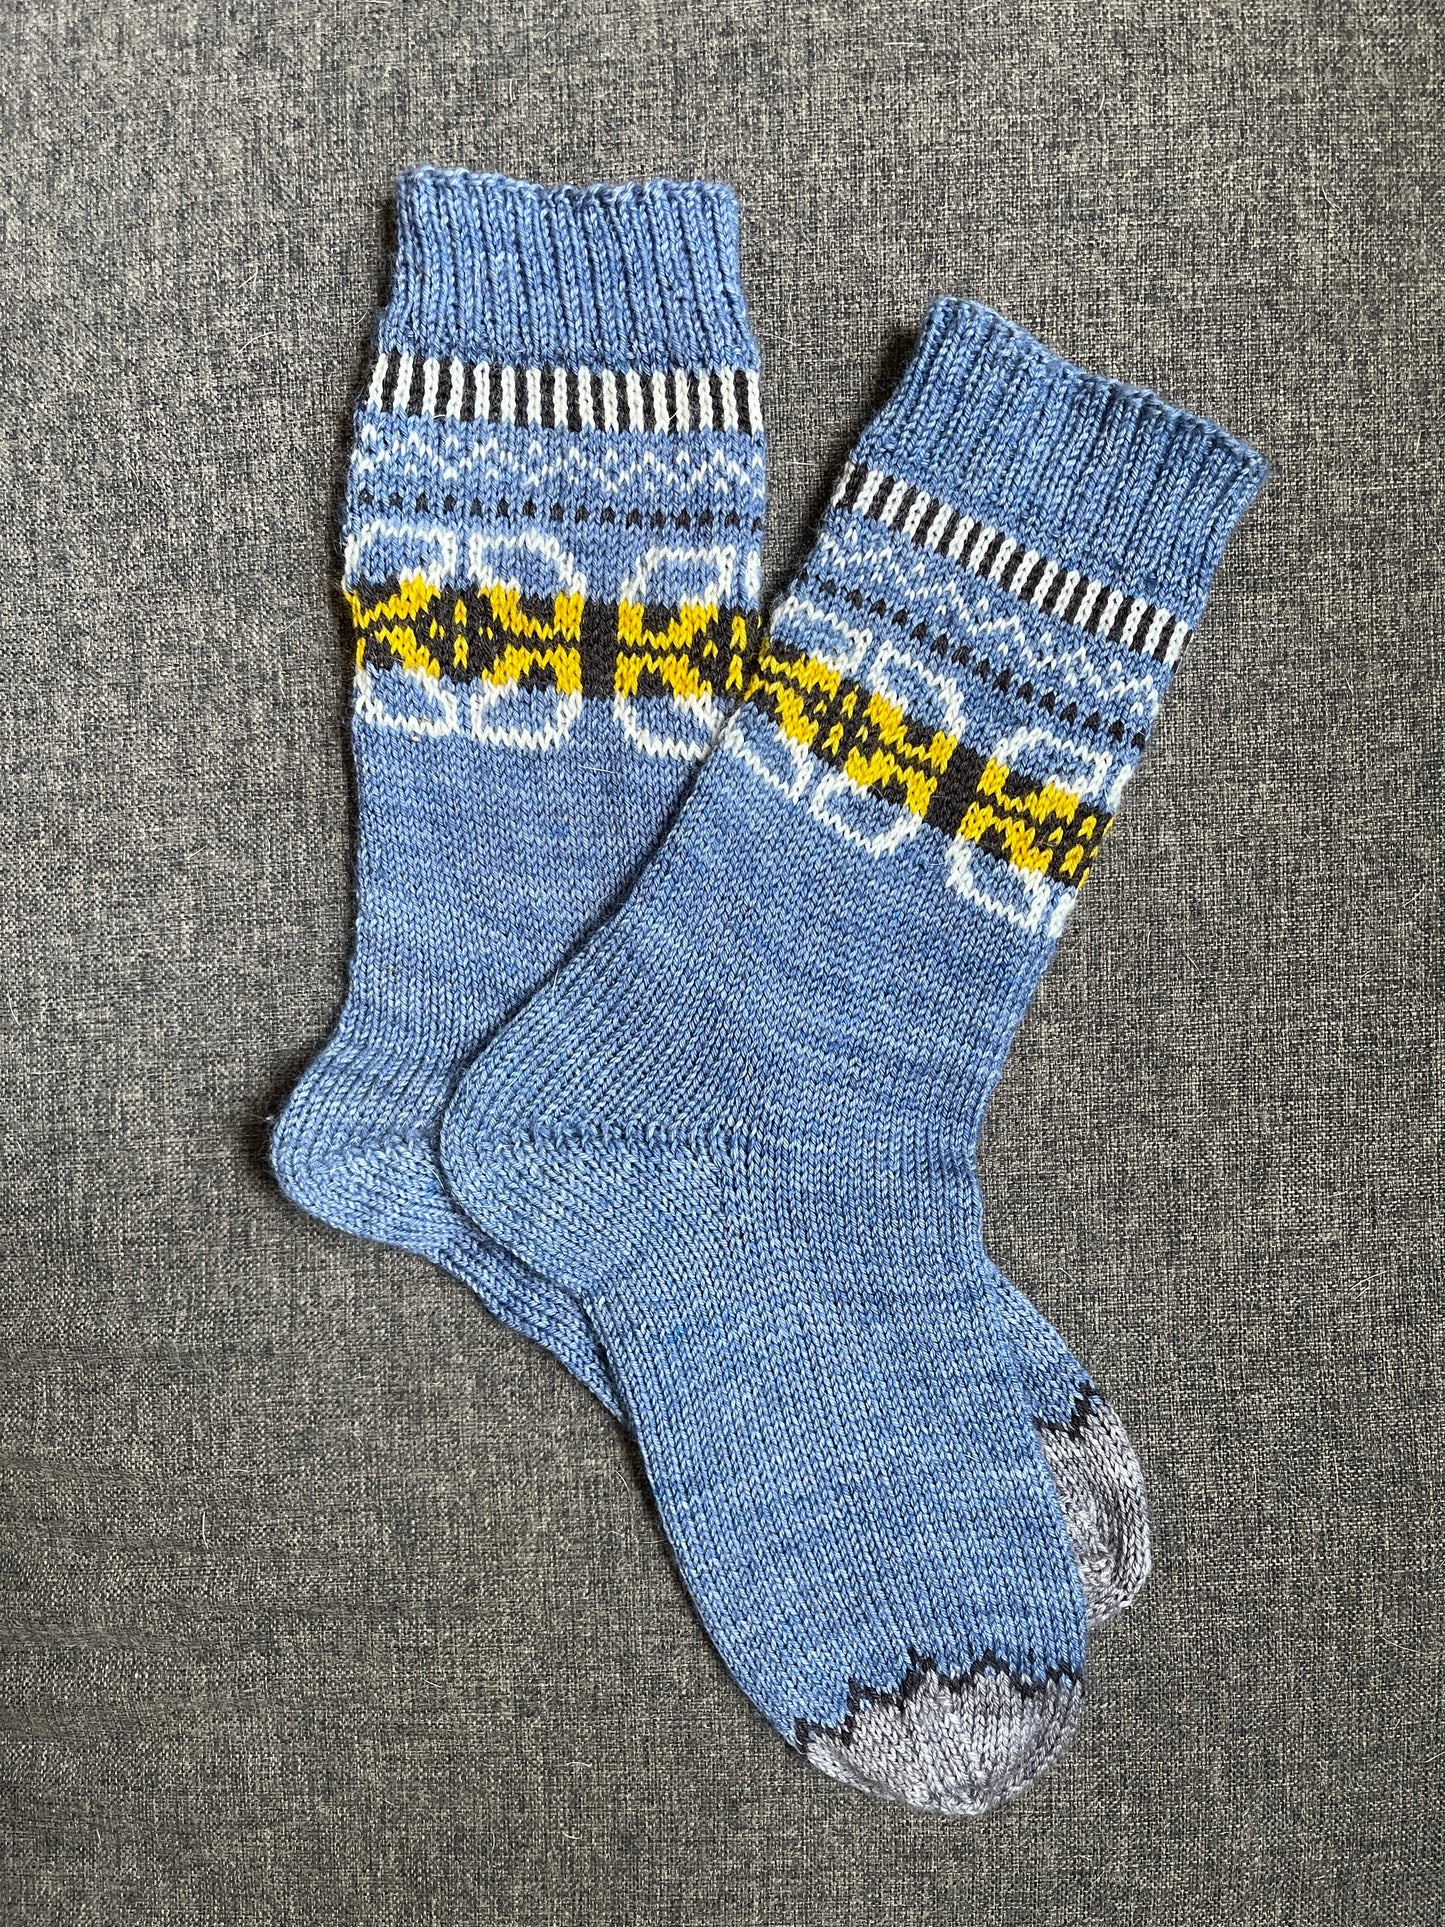 A pair of blue knit socks with a floral pattern, several geometric elements, and a gray toe with a black zigzag border.